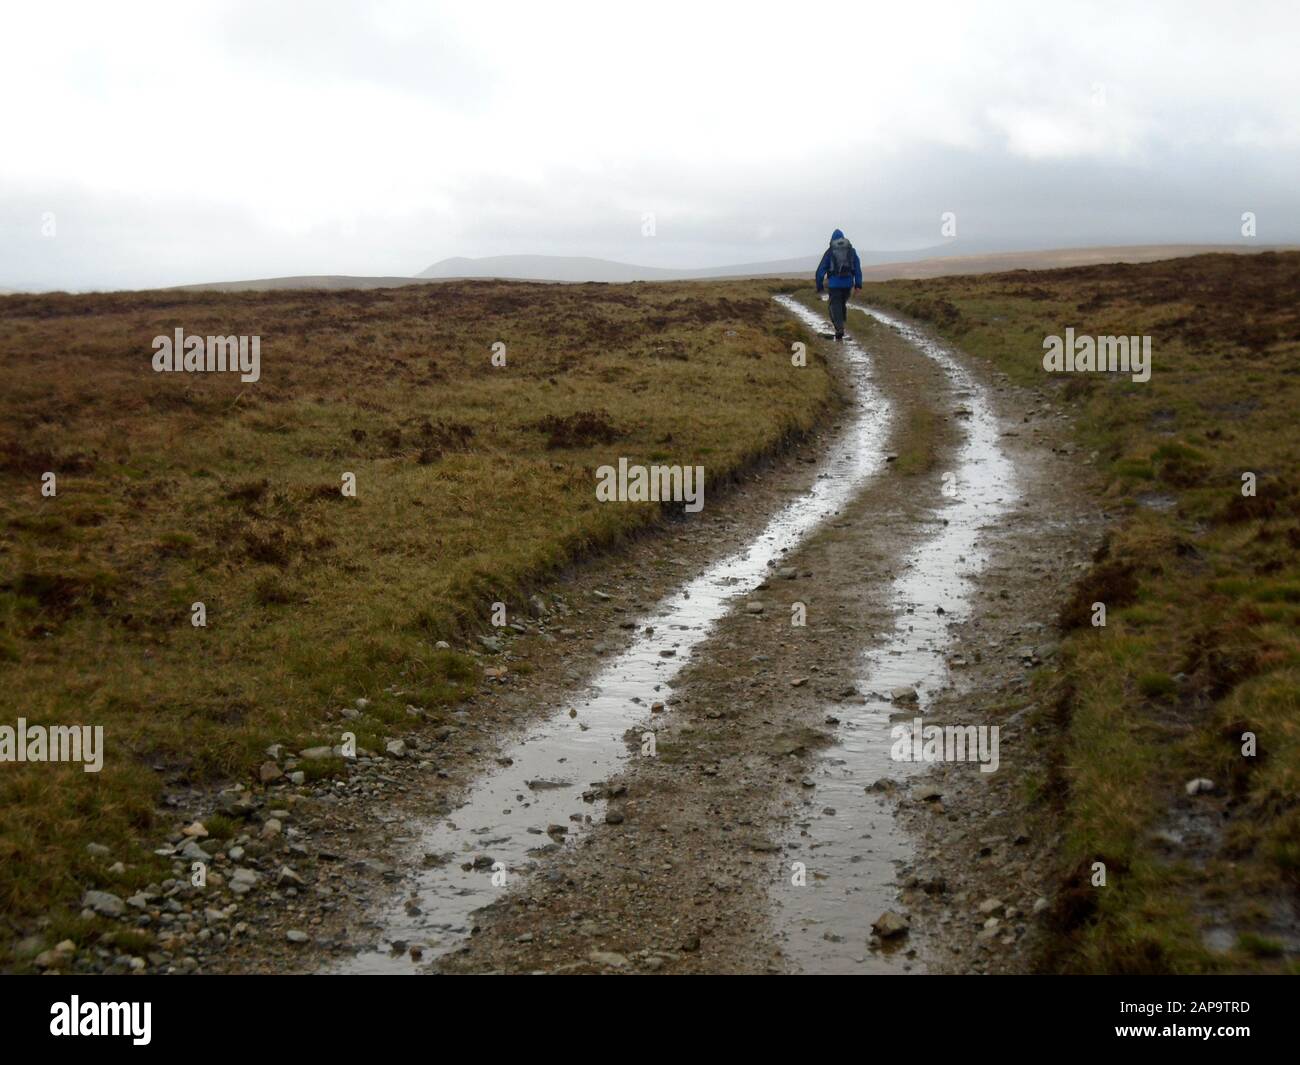 Lone Man Walking On The Cumbria Way Path From The Wainwright "High Pike" Caldbeck Fells, Moseddale, Lake District National Park, Cumbria, Inghilterra, Regno Unito. Foto Stock